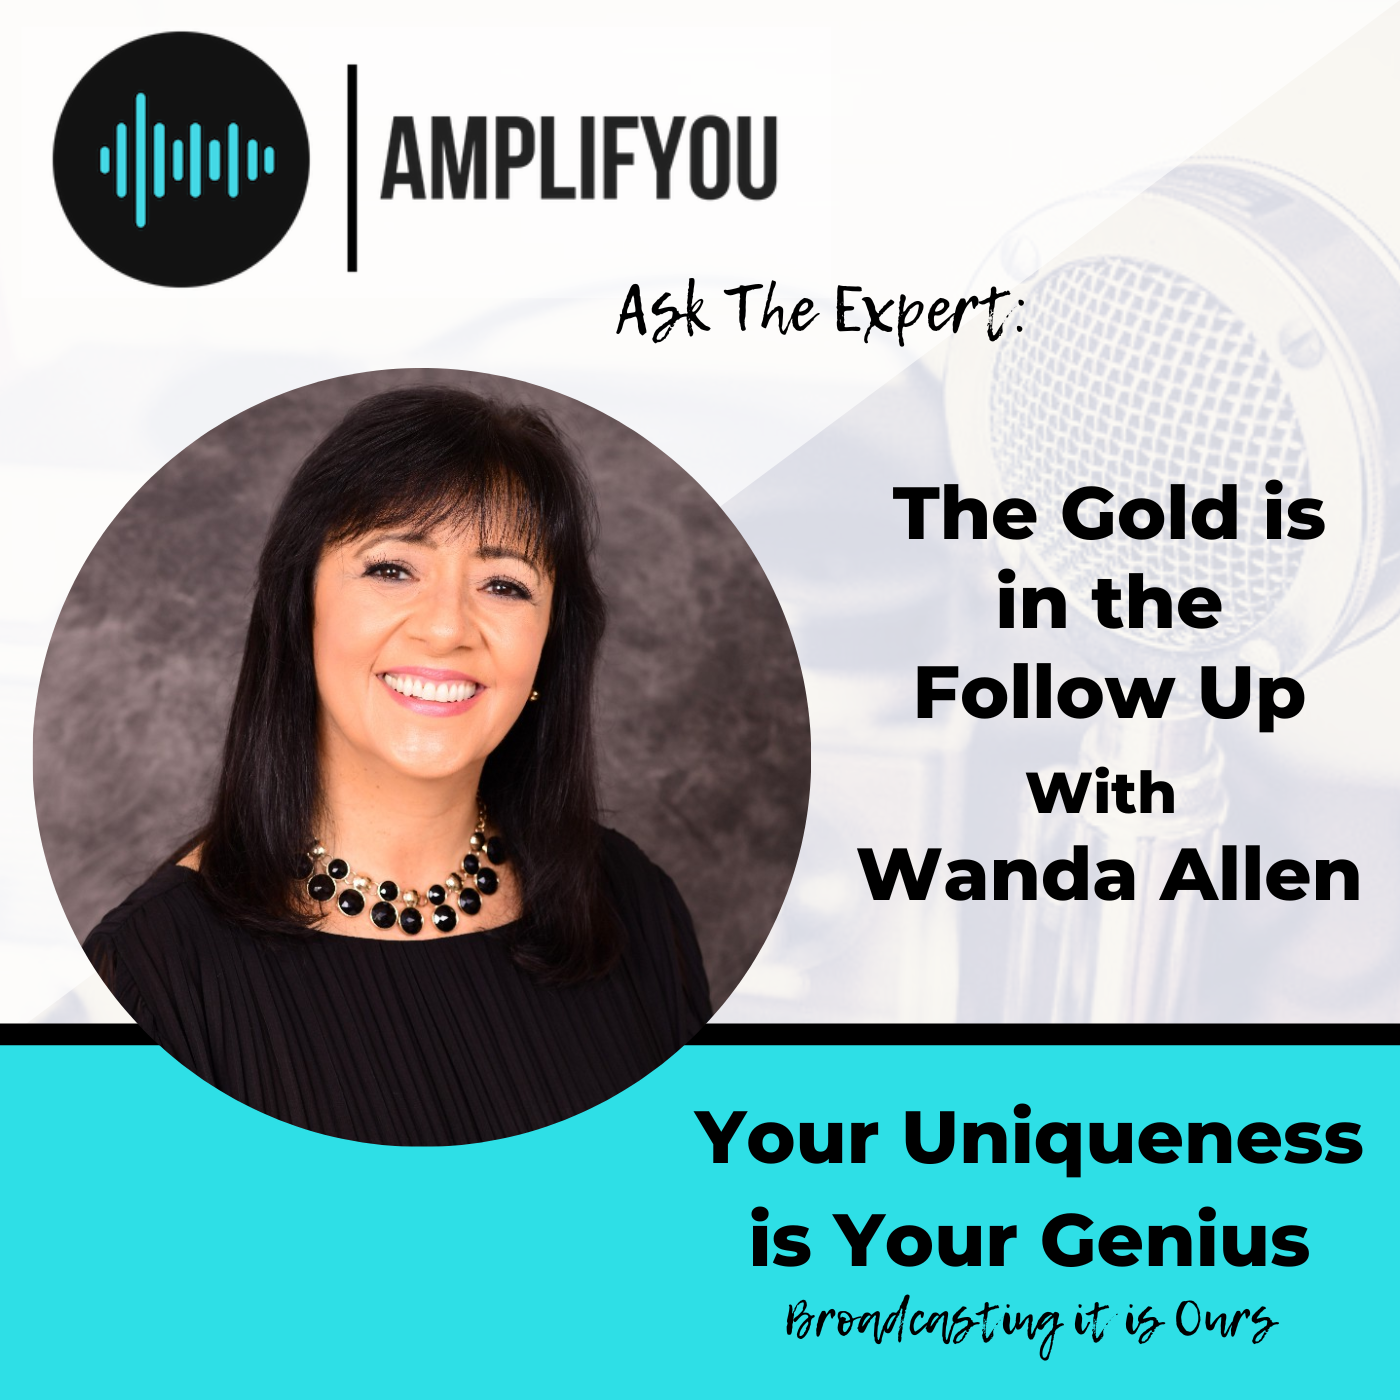 Ask the Expert: The Gold is in the Follow Up with Wanda Allen